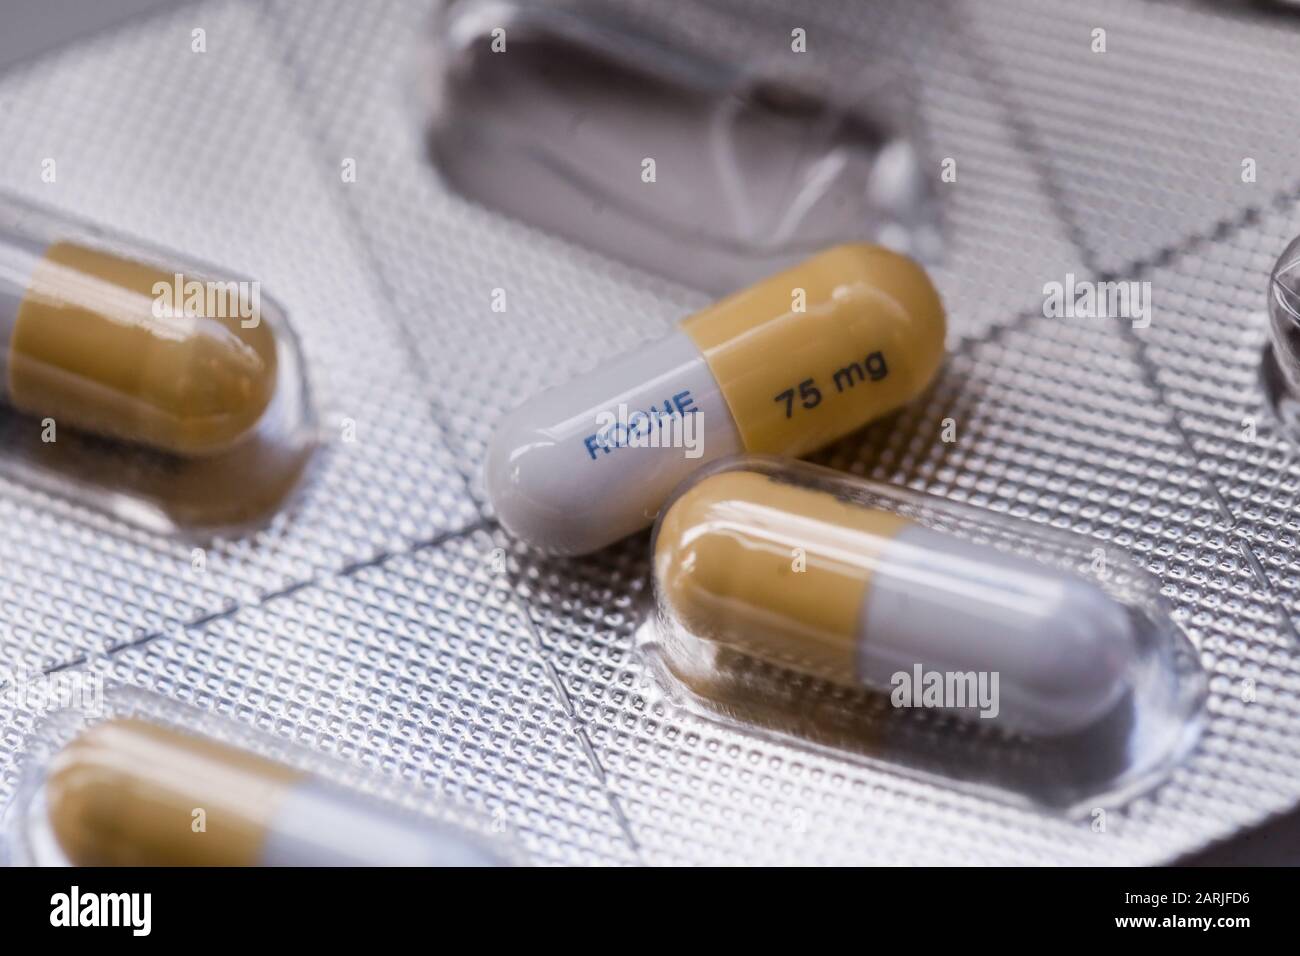 Bucharest, Romania - January 27, 2020: Close up image with a Tamiflu capsule (oseltamivir) on a blister pack, an antiviral medication that blocks the Stock Photo